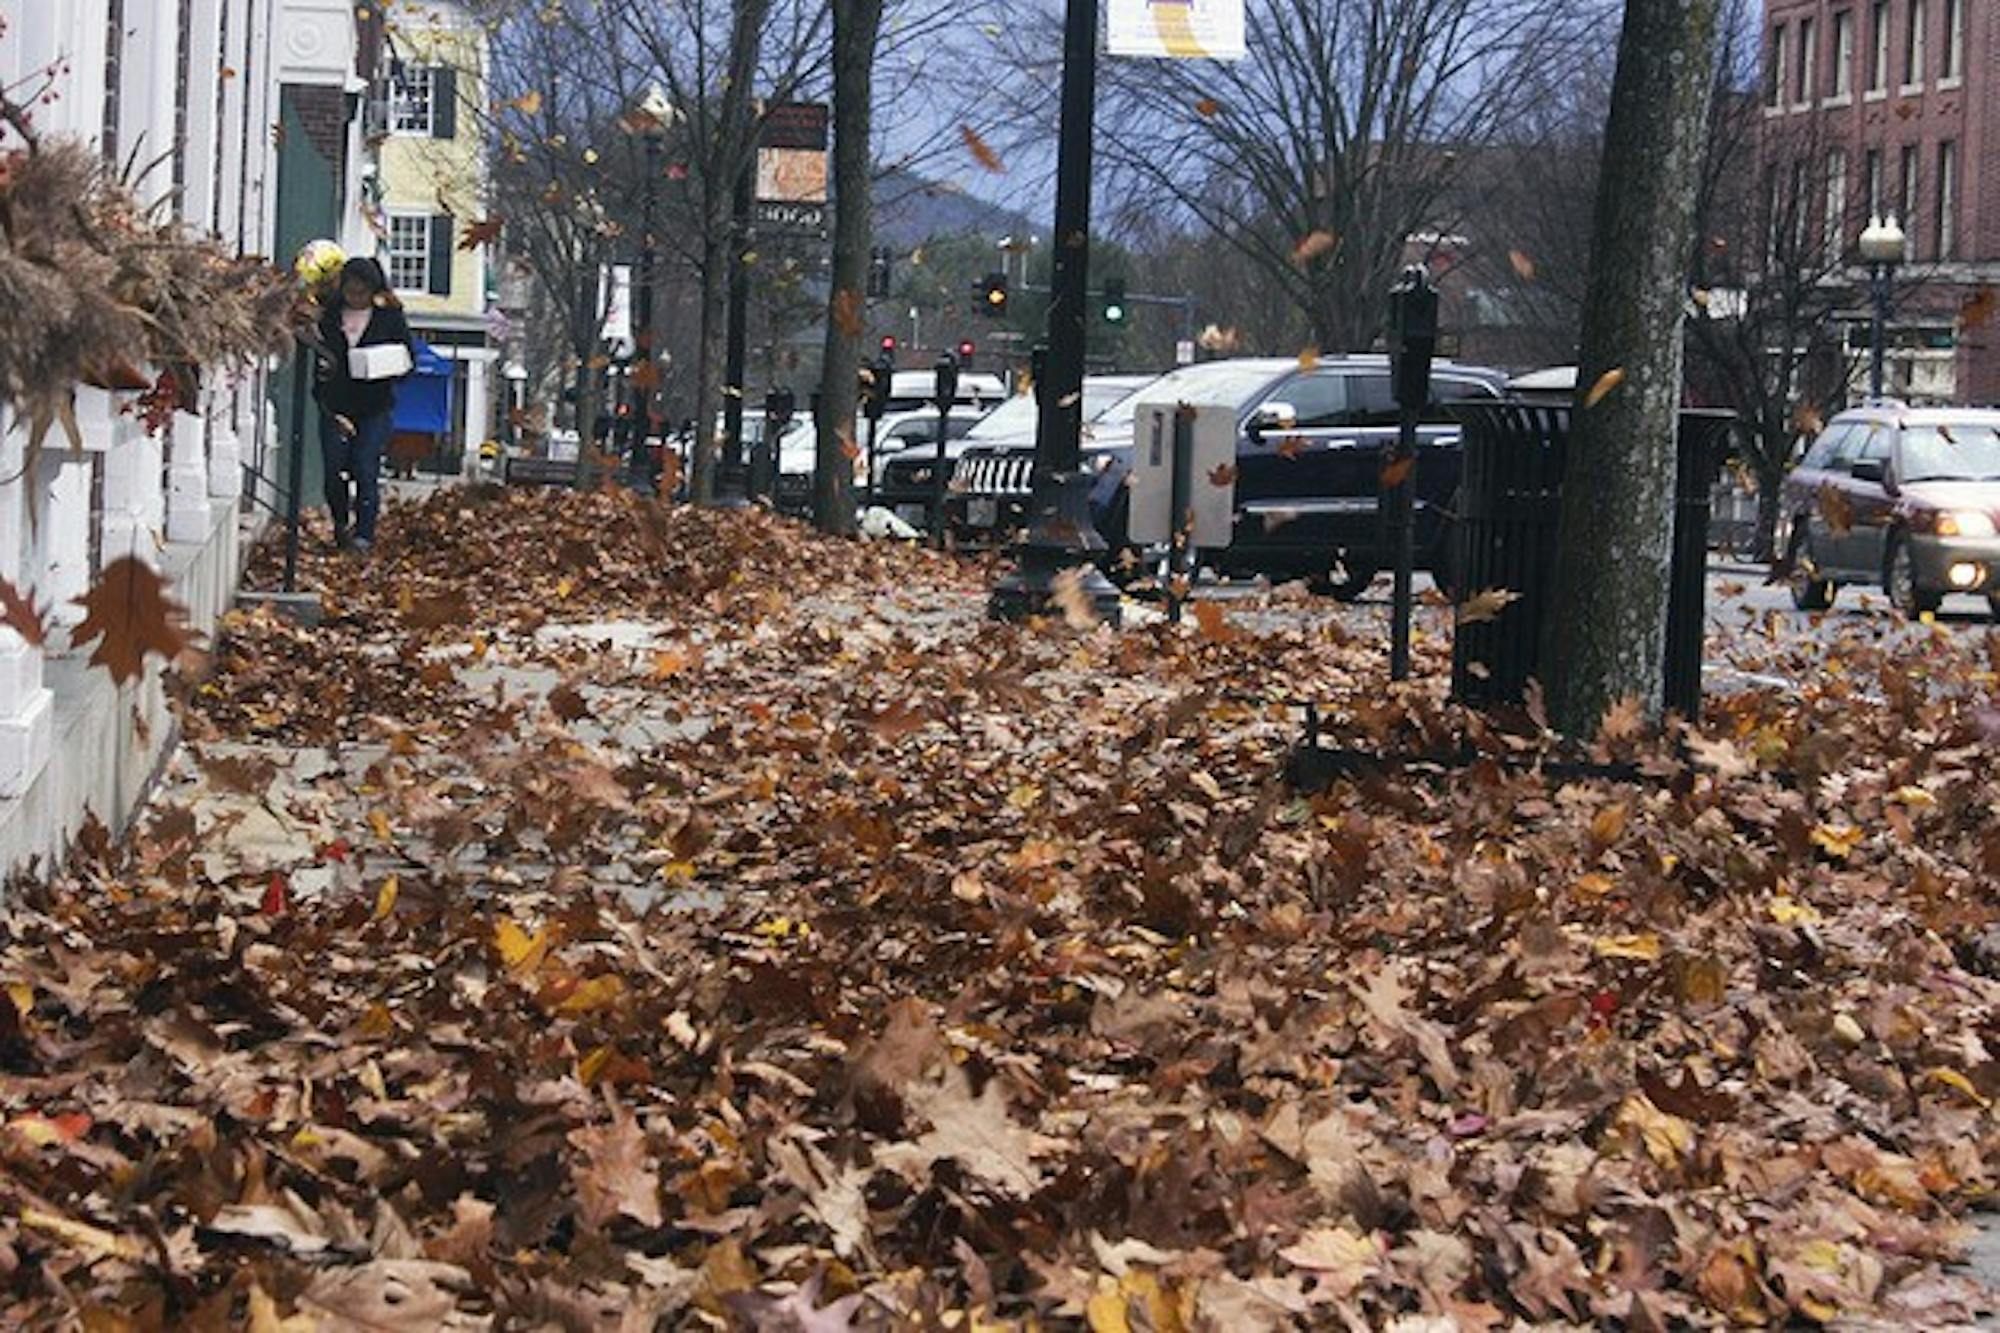 The greater Dartmouth community prepared for Hurricane Sandy on Tuesday afternoon.